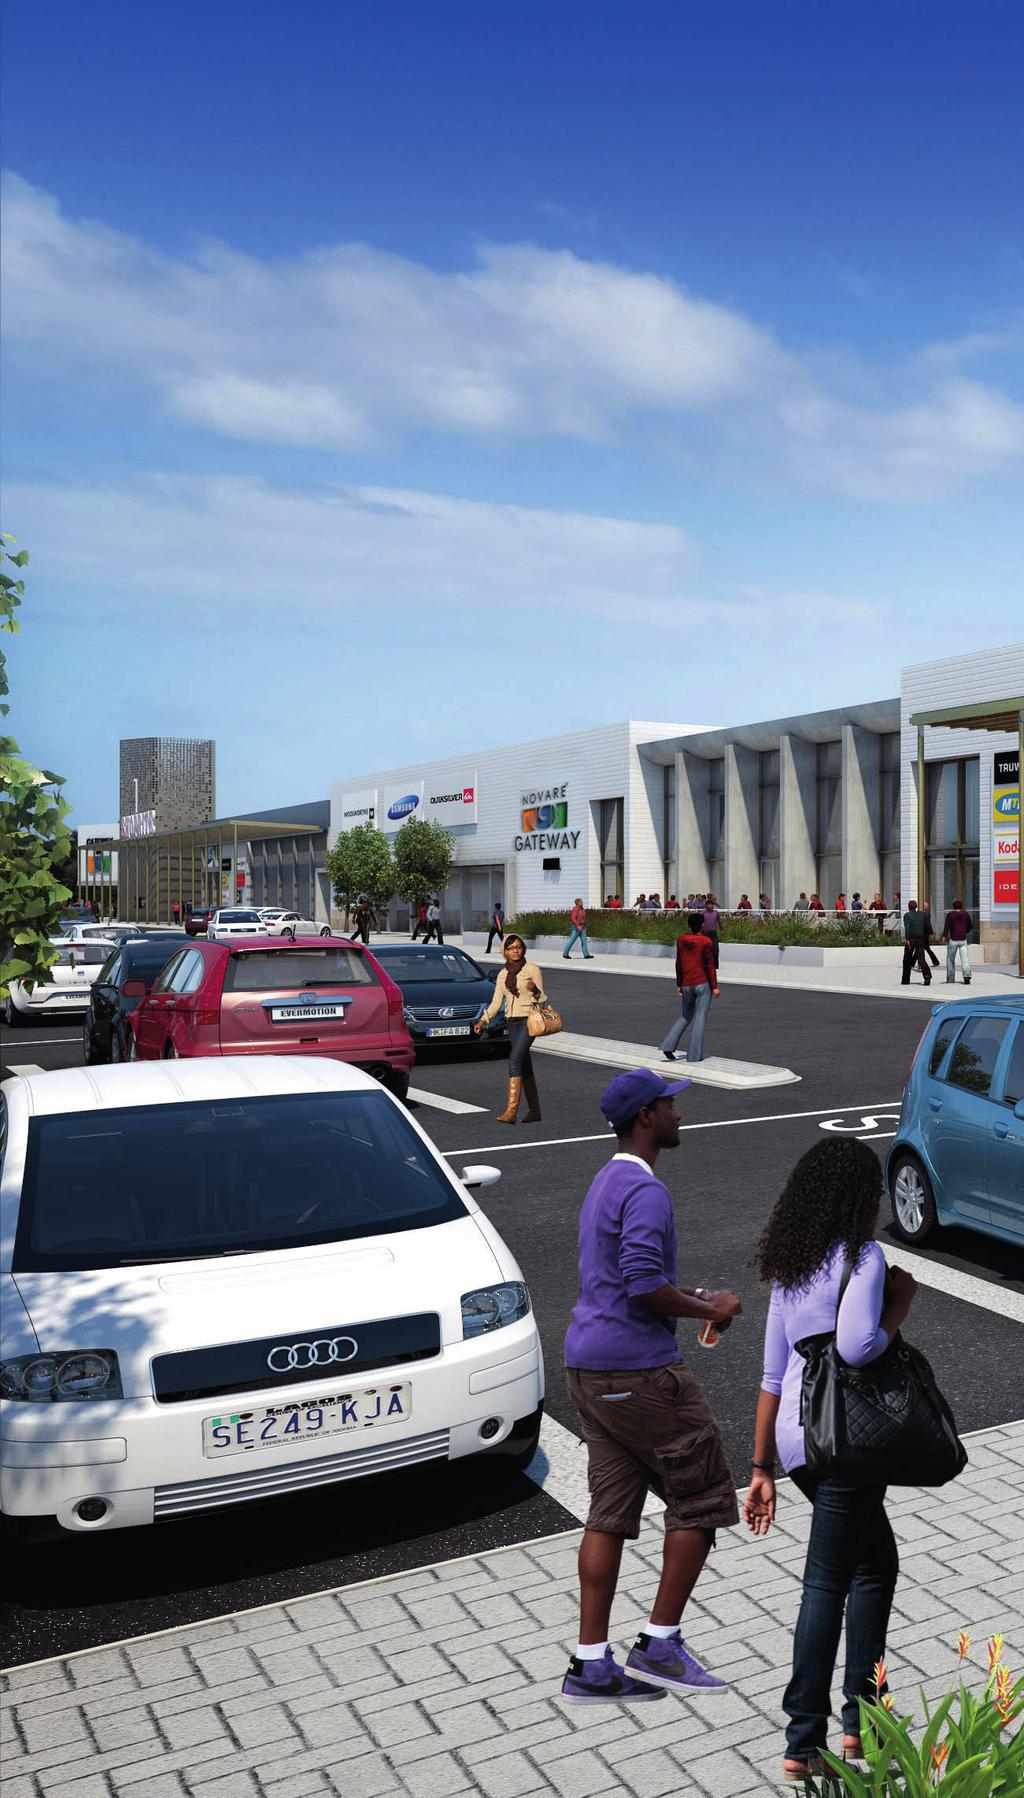 [ BUSINESS FOCUS_NOVARE EQUITY PARTNERS ] Location, Location, Location The Novare Gateway mall in Abuja is a huge construction project.